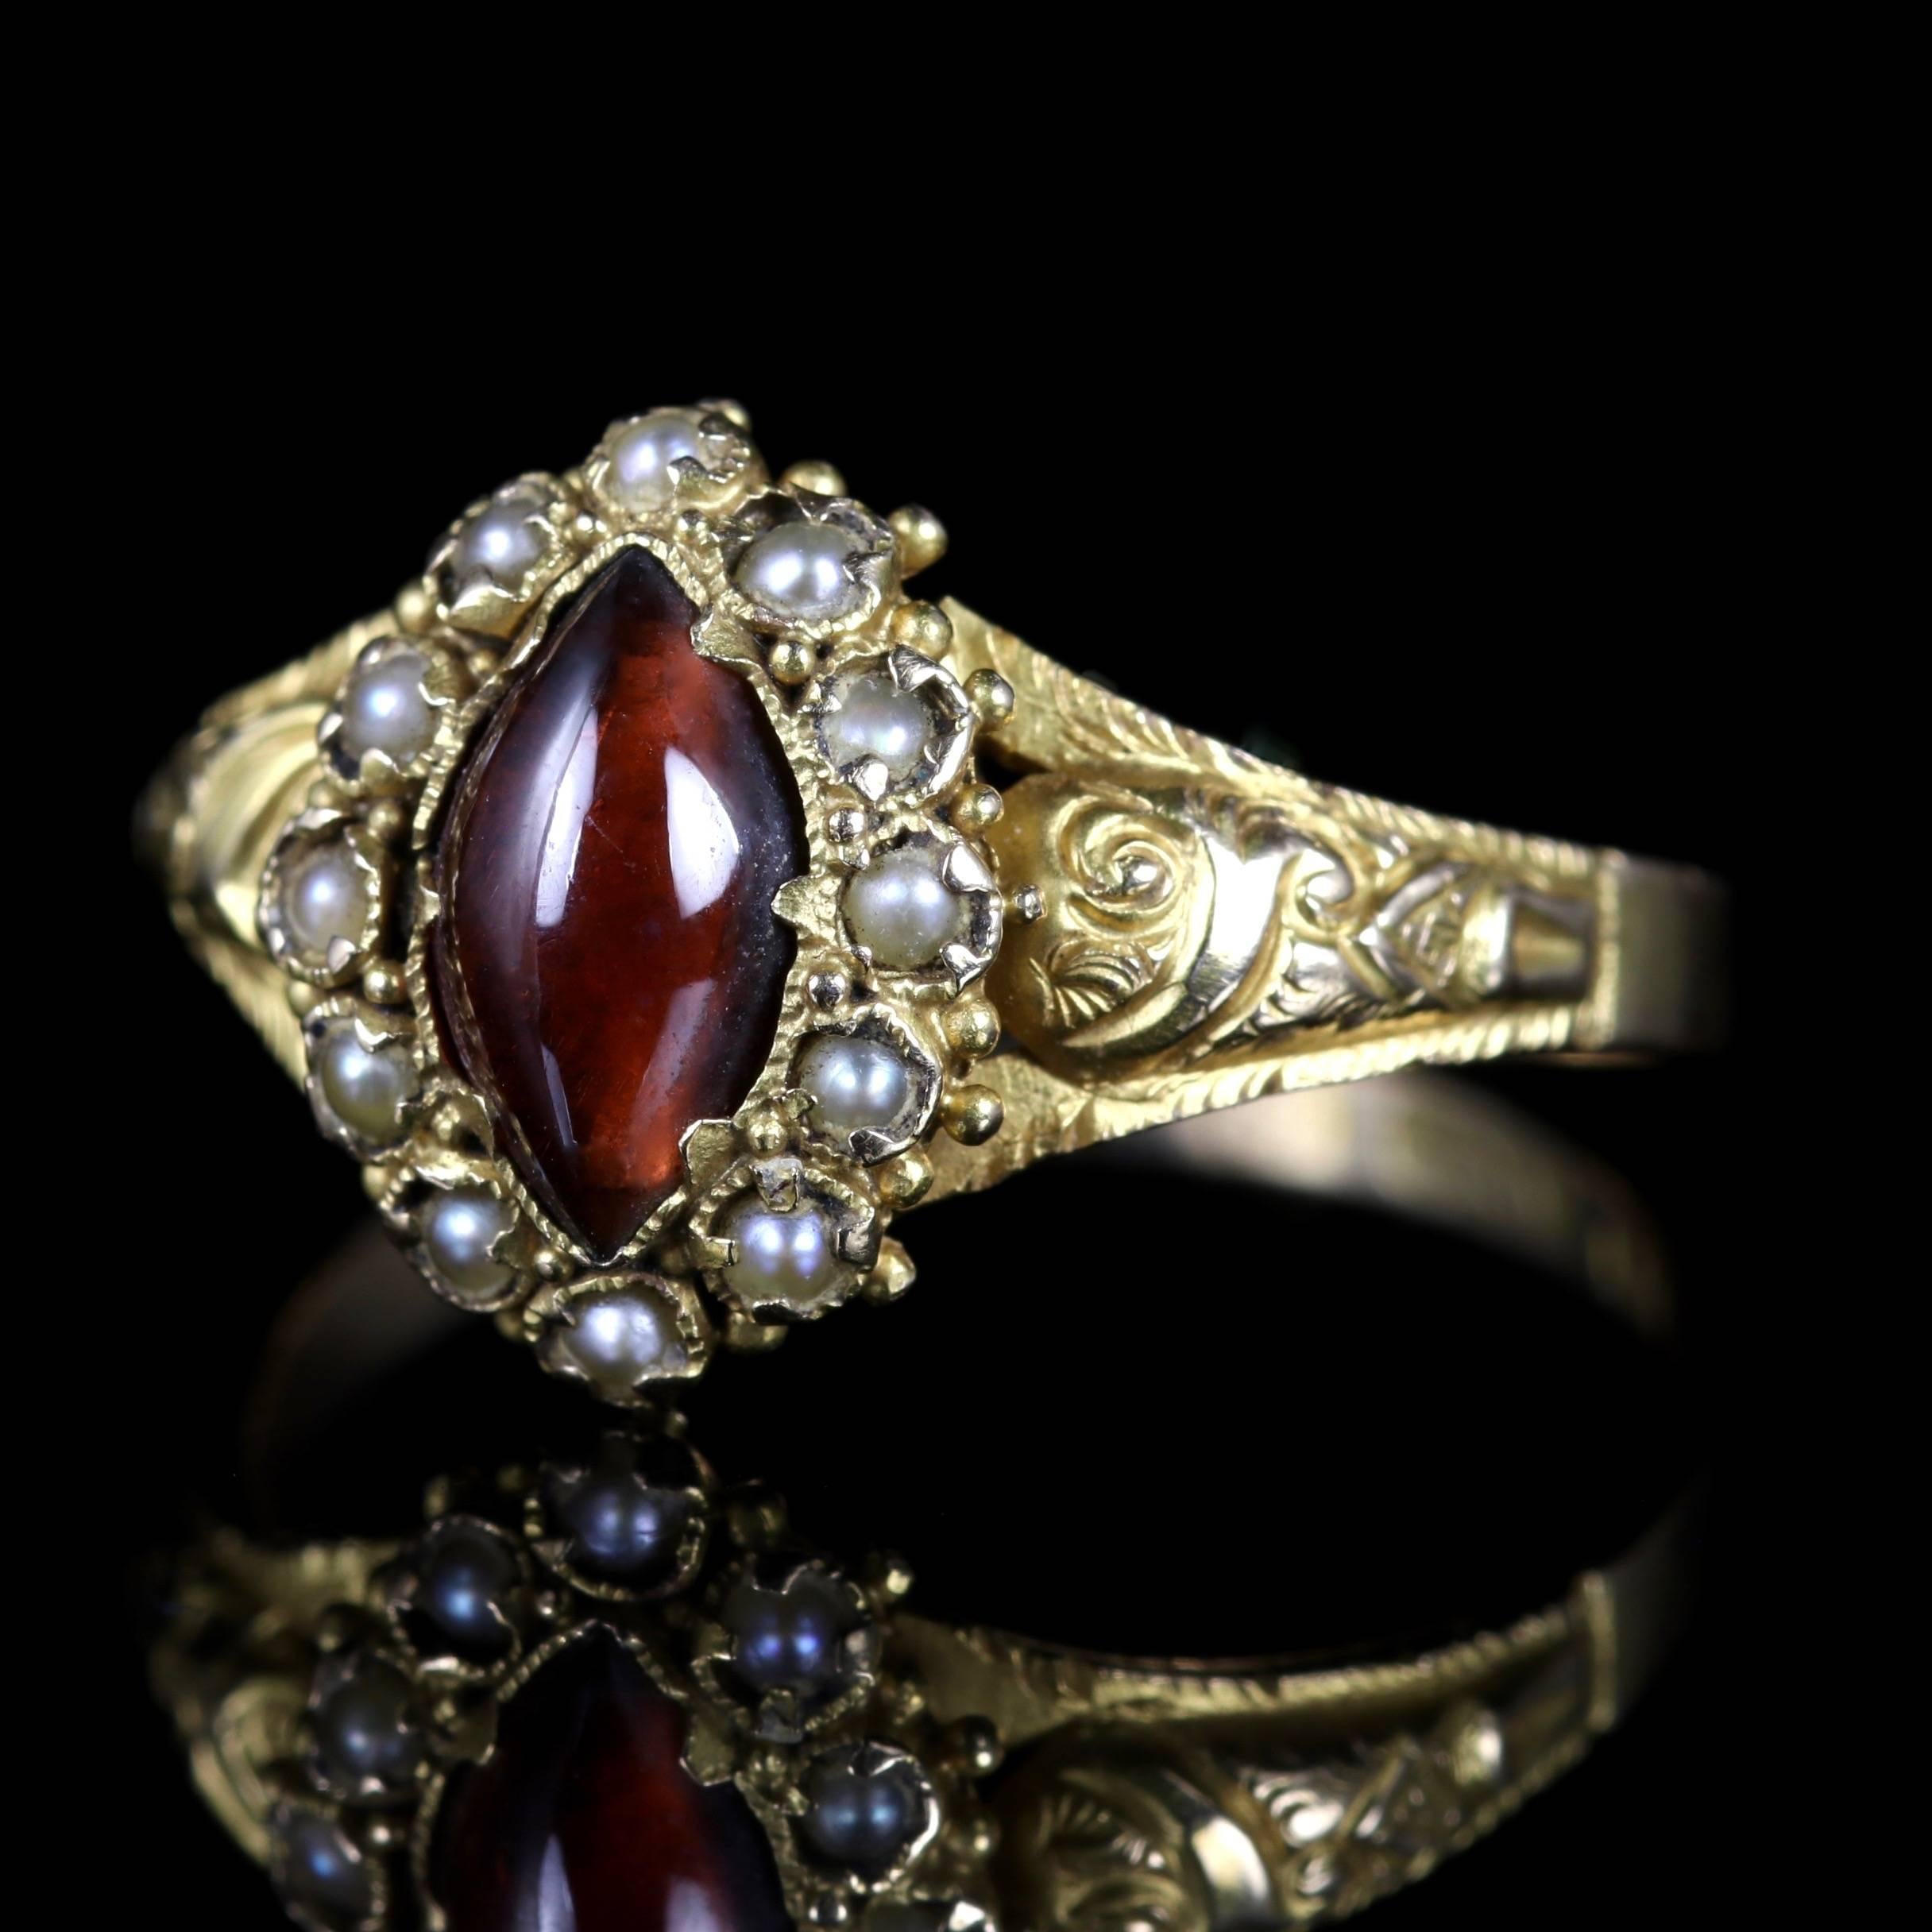 This fabulous Georgian Cabochon Marquise cut Garnet is set in 18ct Gold, Circa 1820.

The ring is adorned with a halo of Pearls in a beautiful engraved Georgian gallery.

Due to its age, Georgian jewellery is quite rare, with some pieces almost